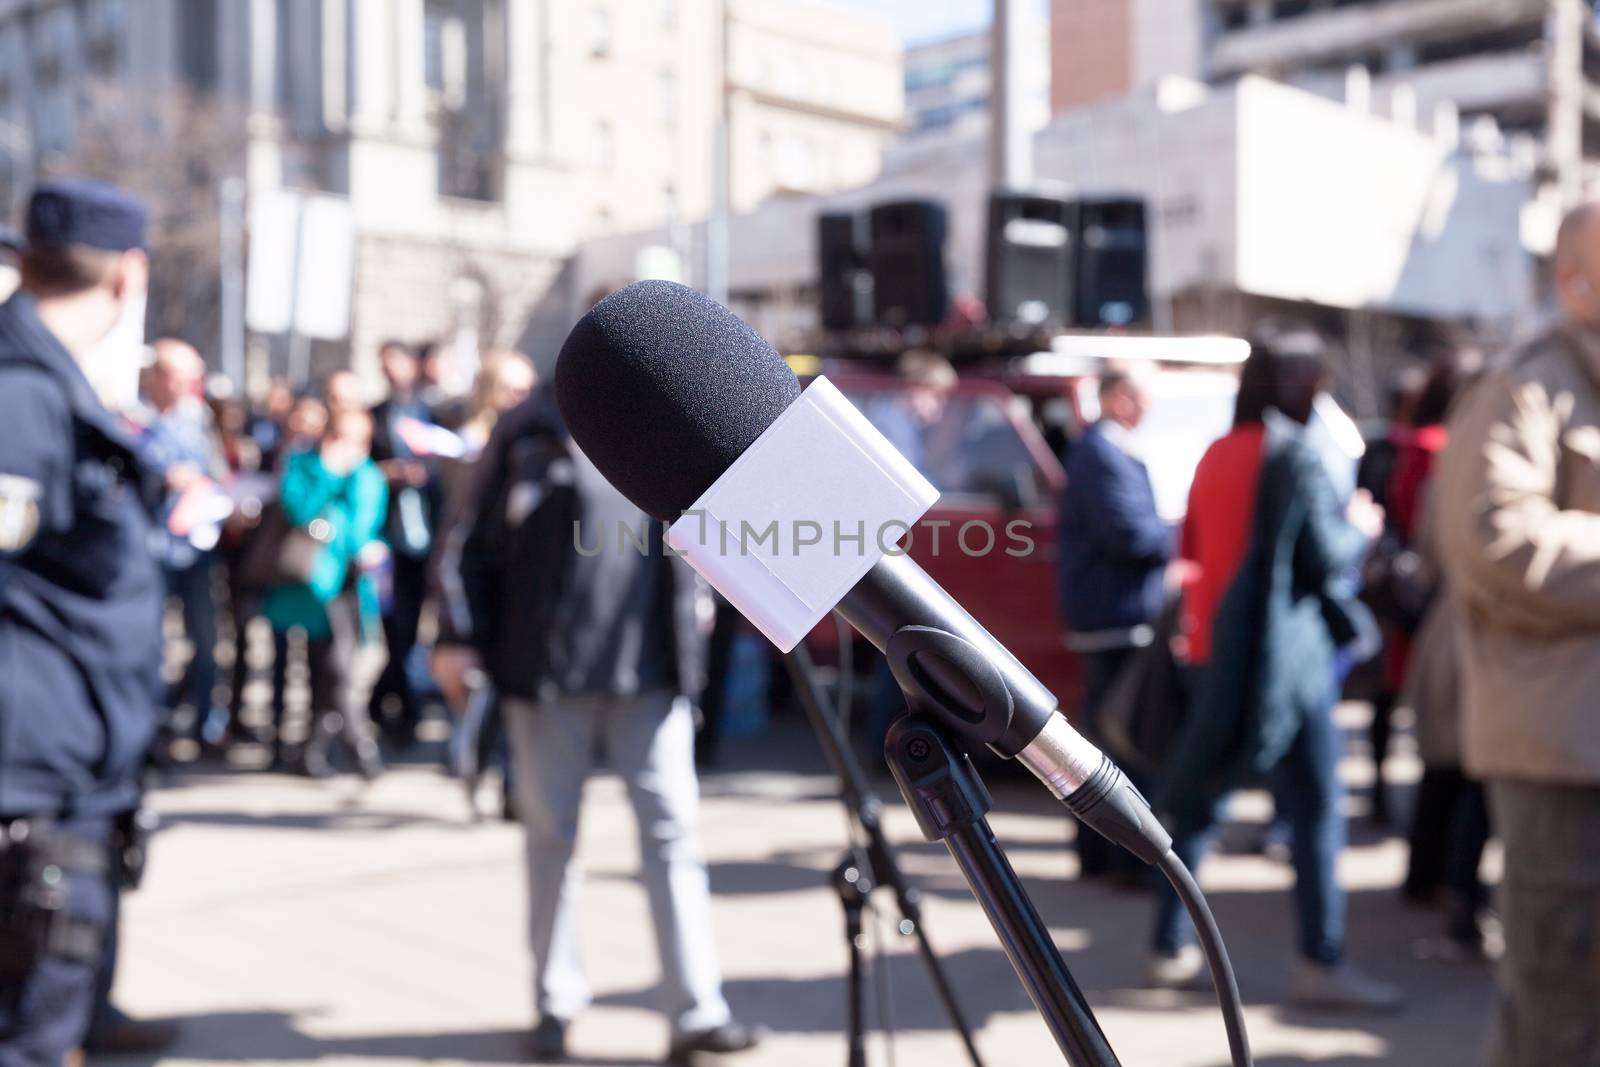 Microphone in focus, blurred crowd in background